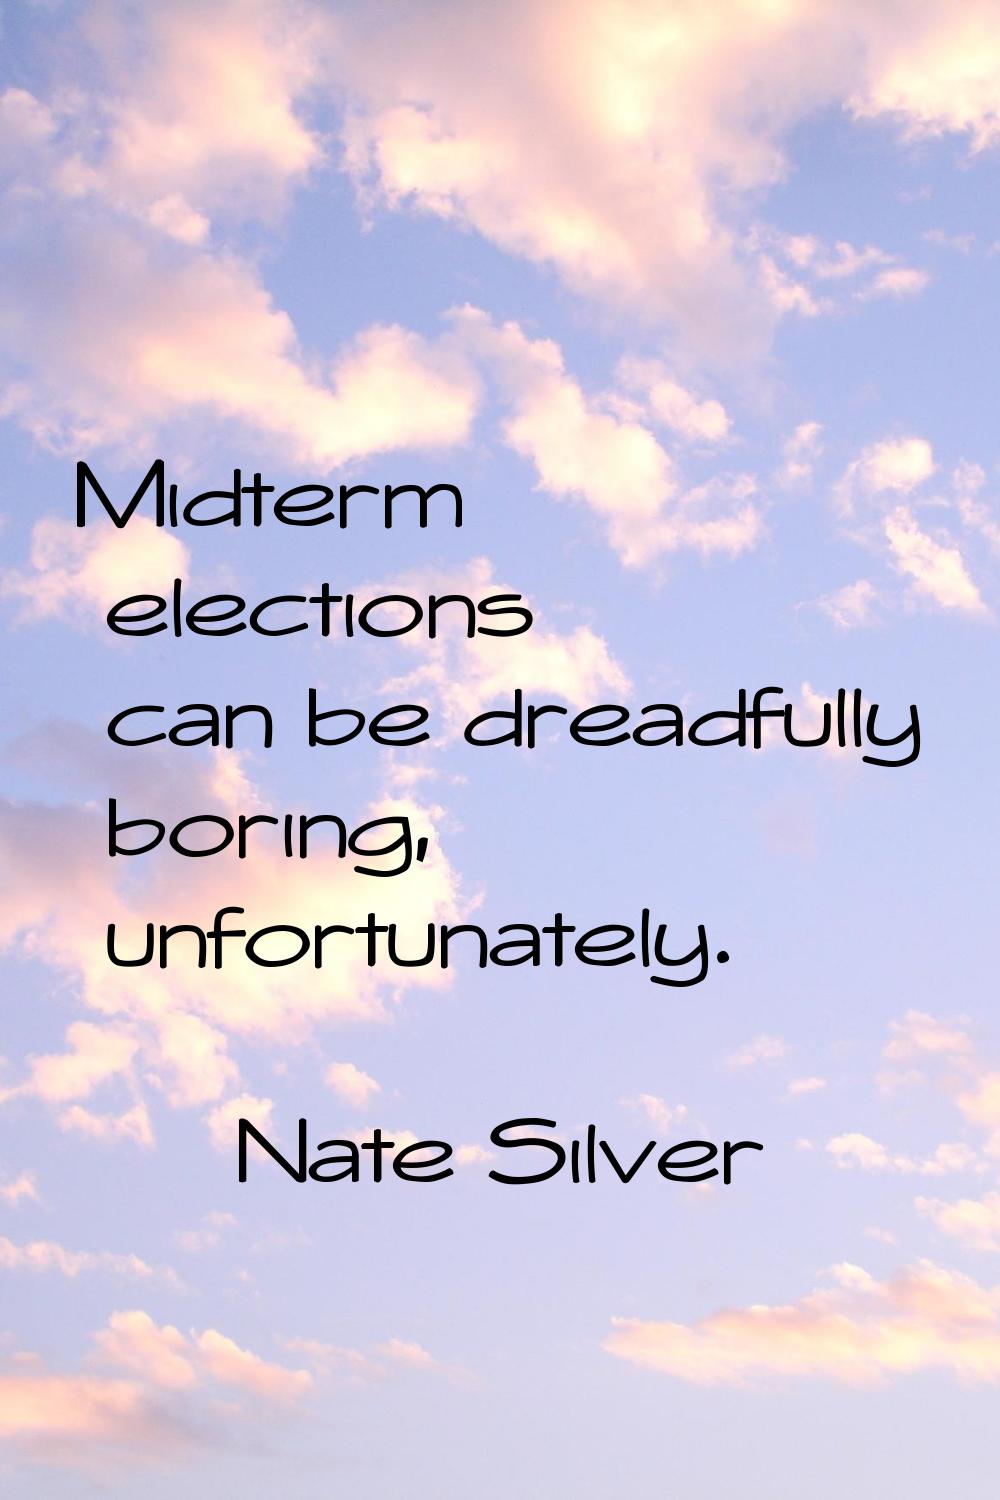 Midterm elections can be dreadfully boring, unfortunately.